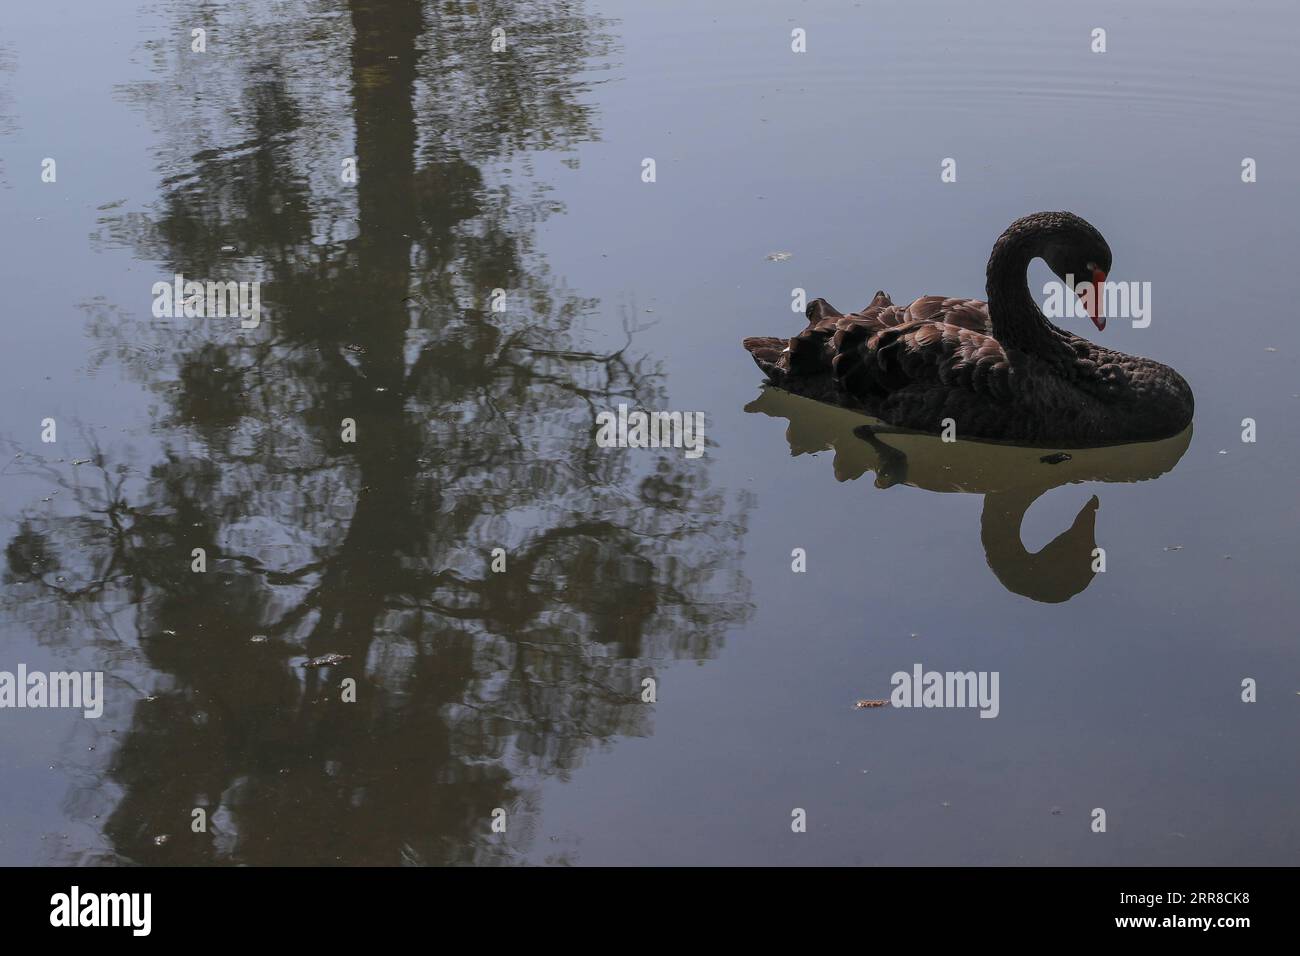 210501 -- NAMUR, May 1, 2021 -- A black swan swims in the Water Gardens of Annevoie in Annevoie-Rouillon, Namur, Belgium, May 1, 2021. The Water Gardens of Annevoie were designed and built by Charles-Alexis de Montpellier in the 18th century, with the combination of three ideas: art enhancing nature , art in tune with nature and art imitating nature . In 1930 the Gardens were opened for the general public. In 1982, the entire estate, including the gardens and the buildings, were listed as Historical Monuments.  BELGIUM-NAMUR-WATER GARDENS OF ANNEVOIE-SCENERY ZhengxHuansong PUBLICATIONxNOTxINxC Stock Photo